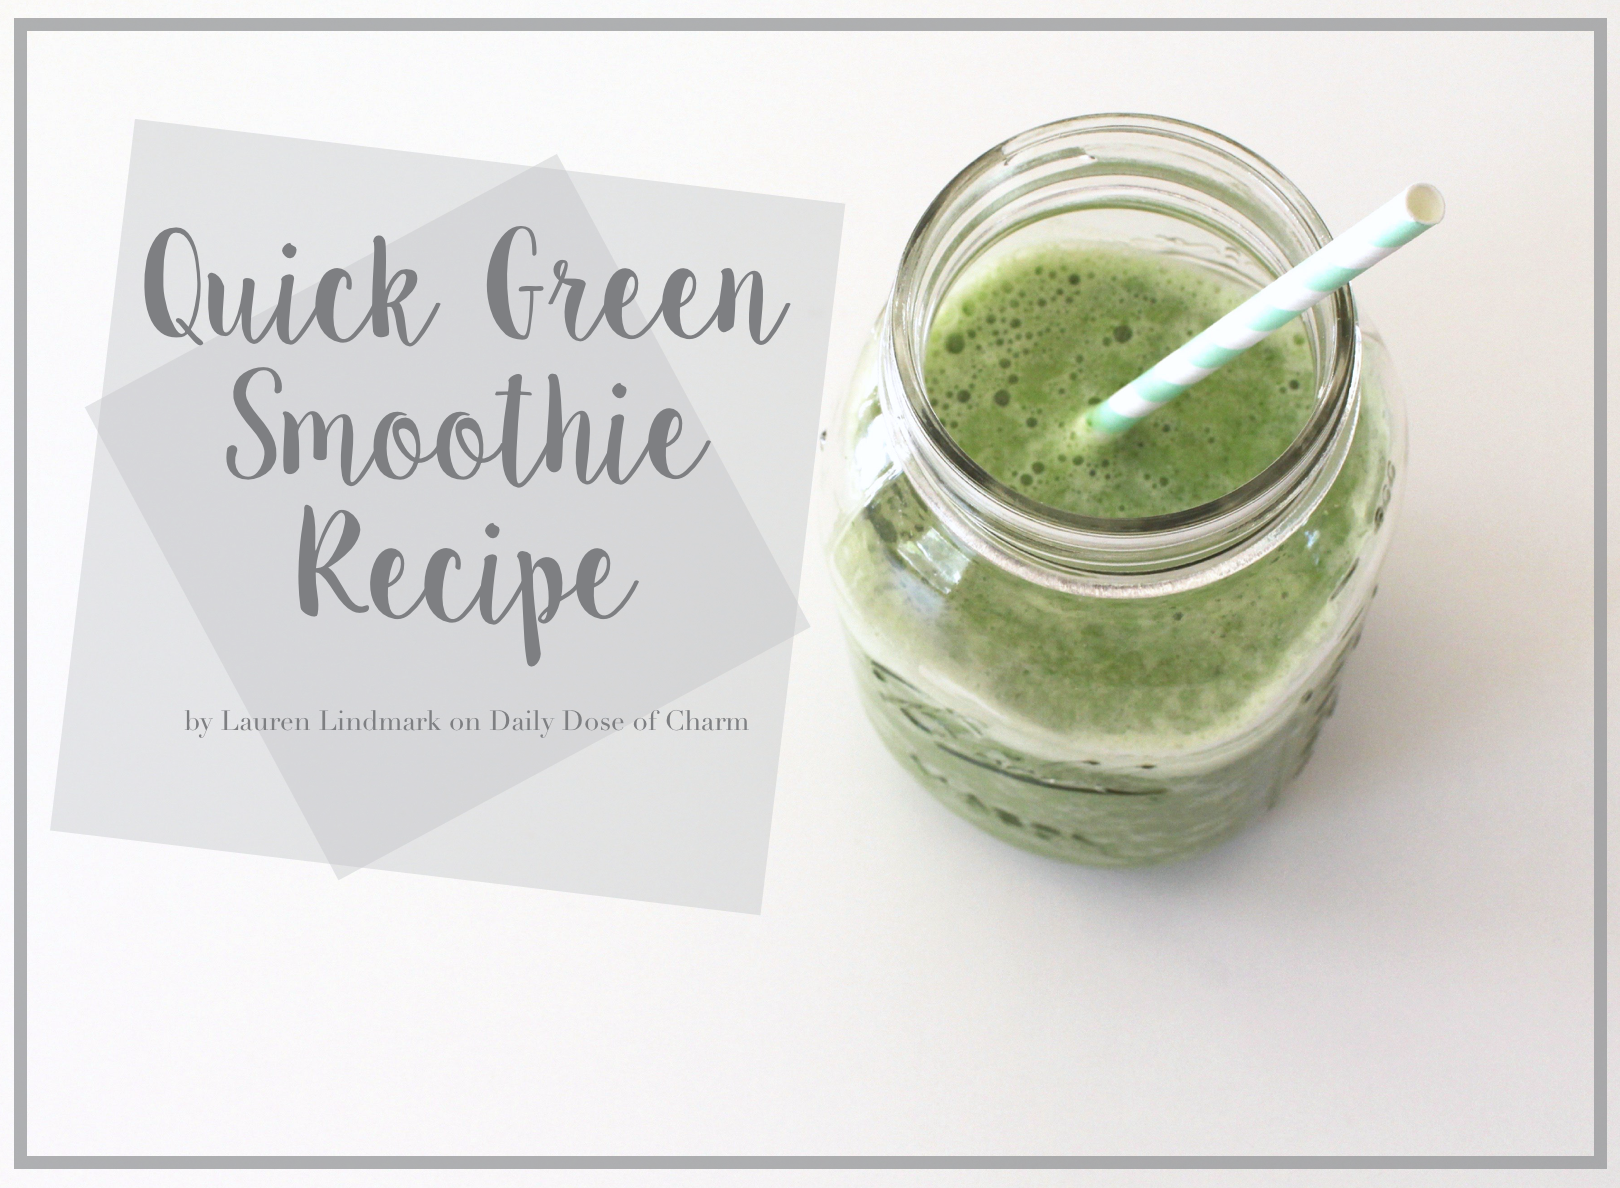 Quick Green Smoothie Recipe | College Breakfast ideas on Daily Dose of Charm by Lauren Lindmark